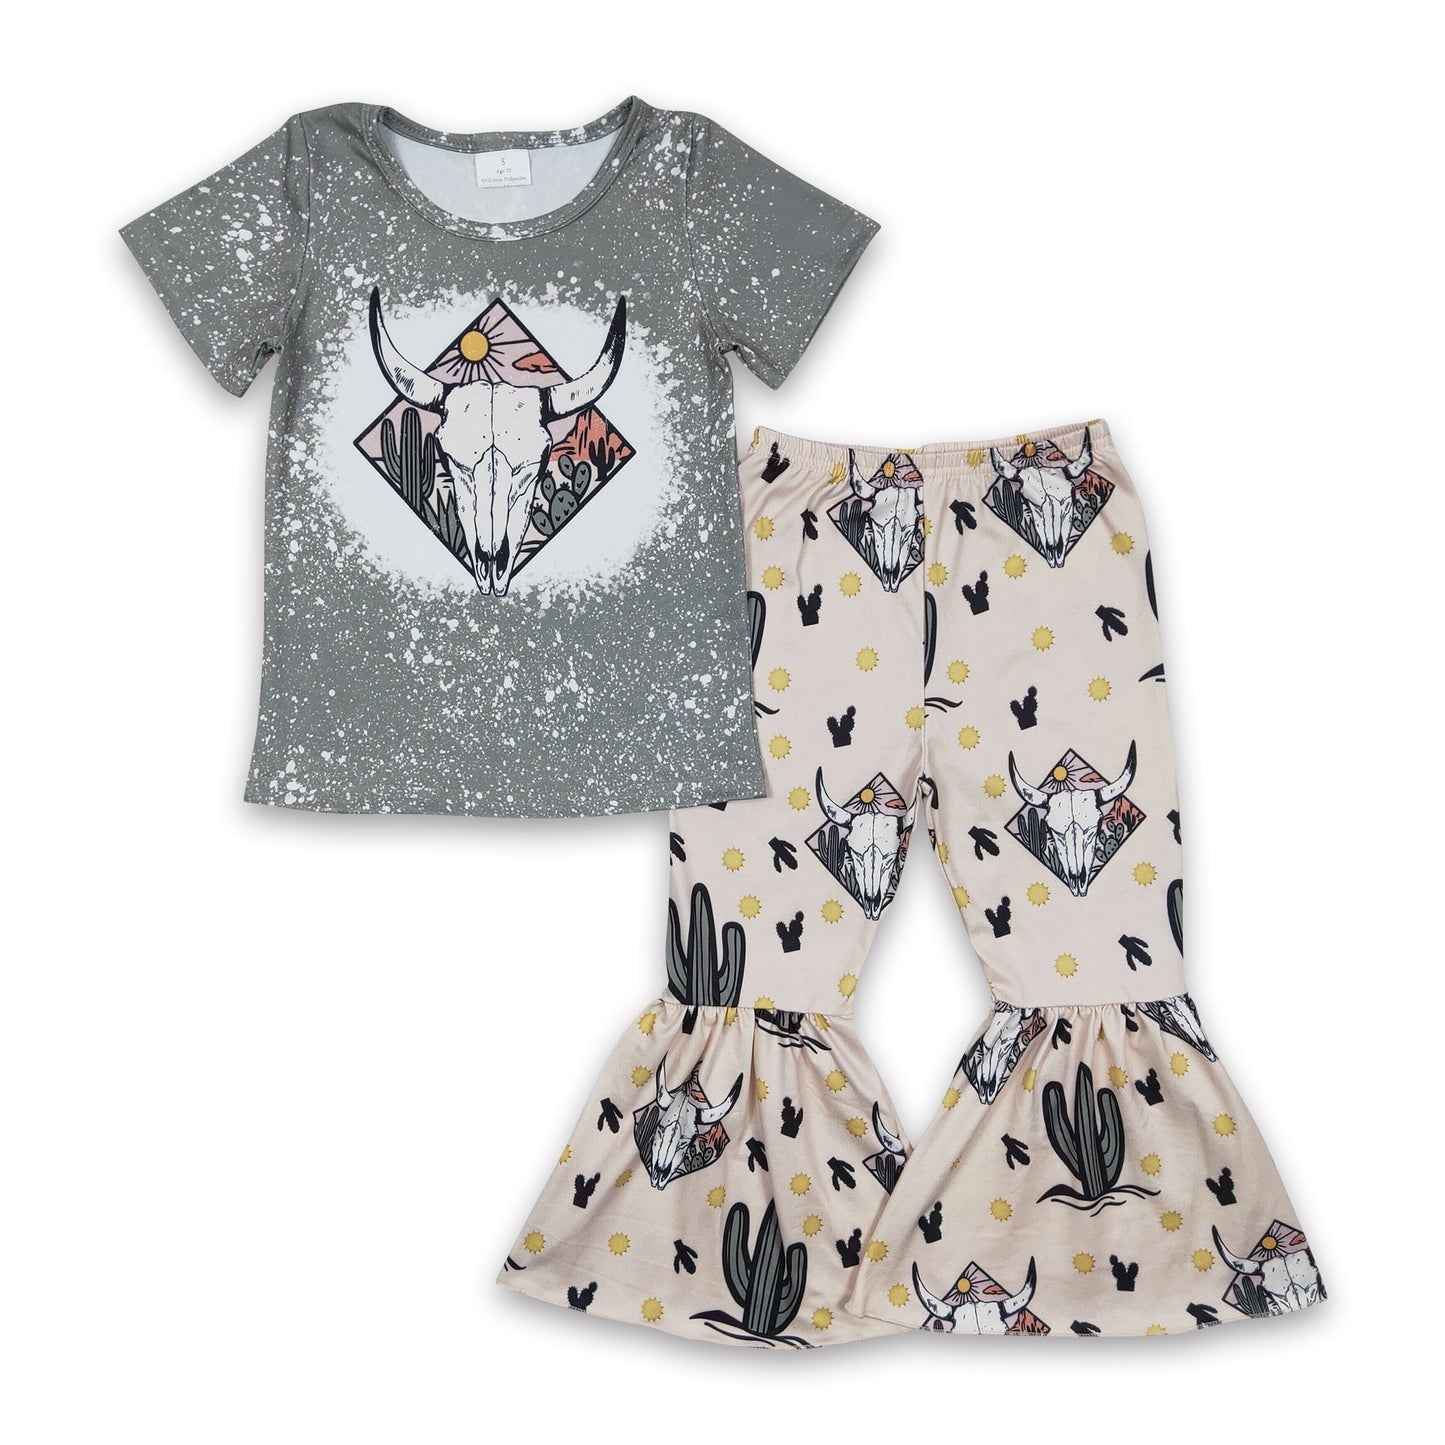 Bull skull cactus baby girls western outfits